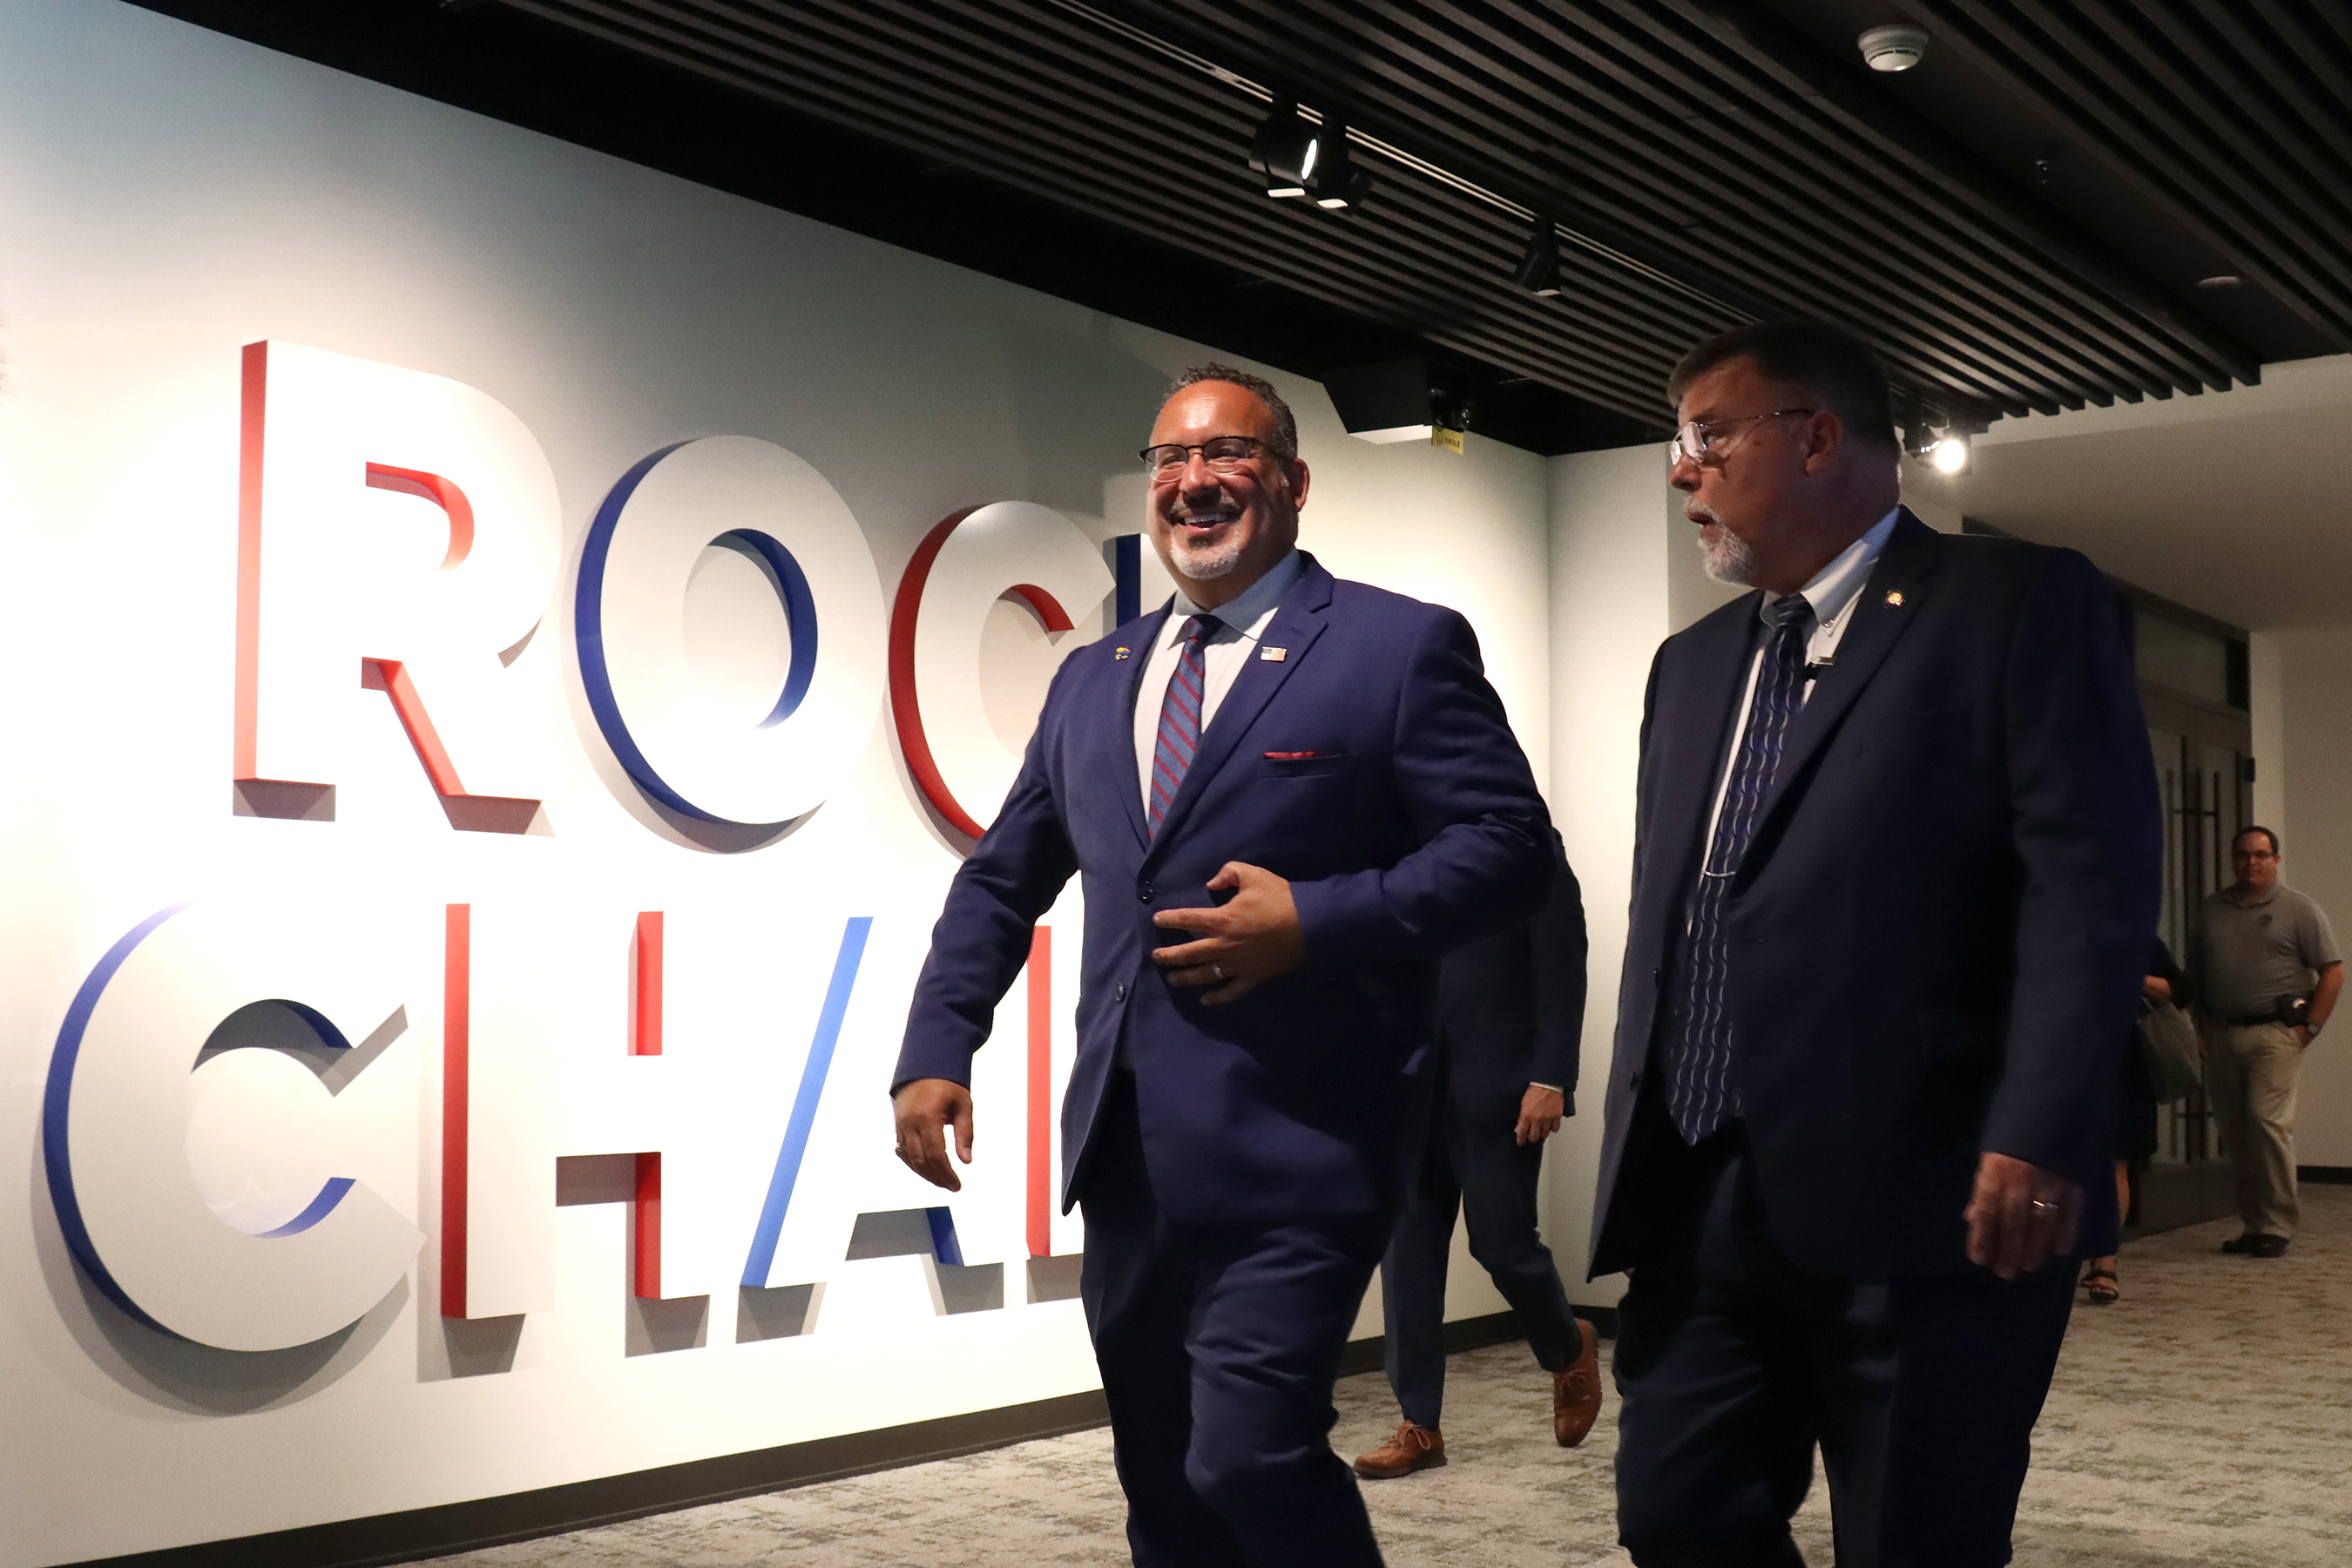 U.S. Secretary of Education Miguel Cardona walks past a wall with “Rock Chalk” written on it at the Jayhawk Welcome Center. 